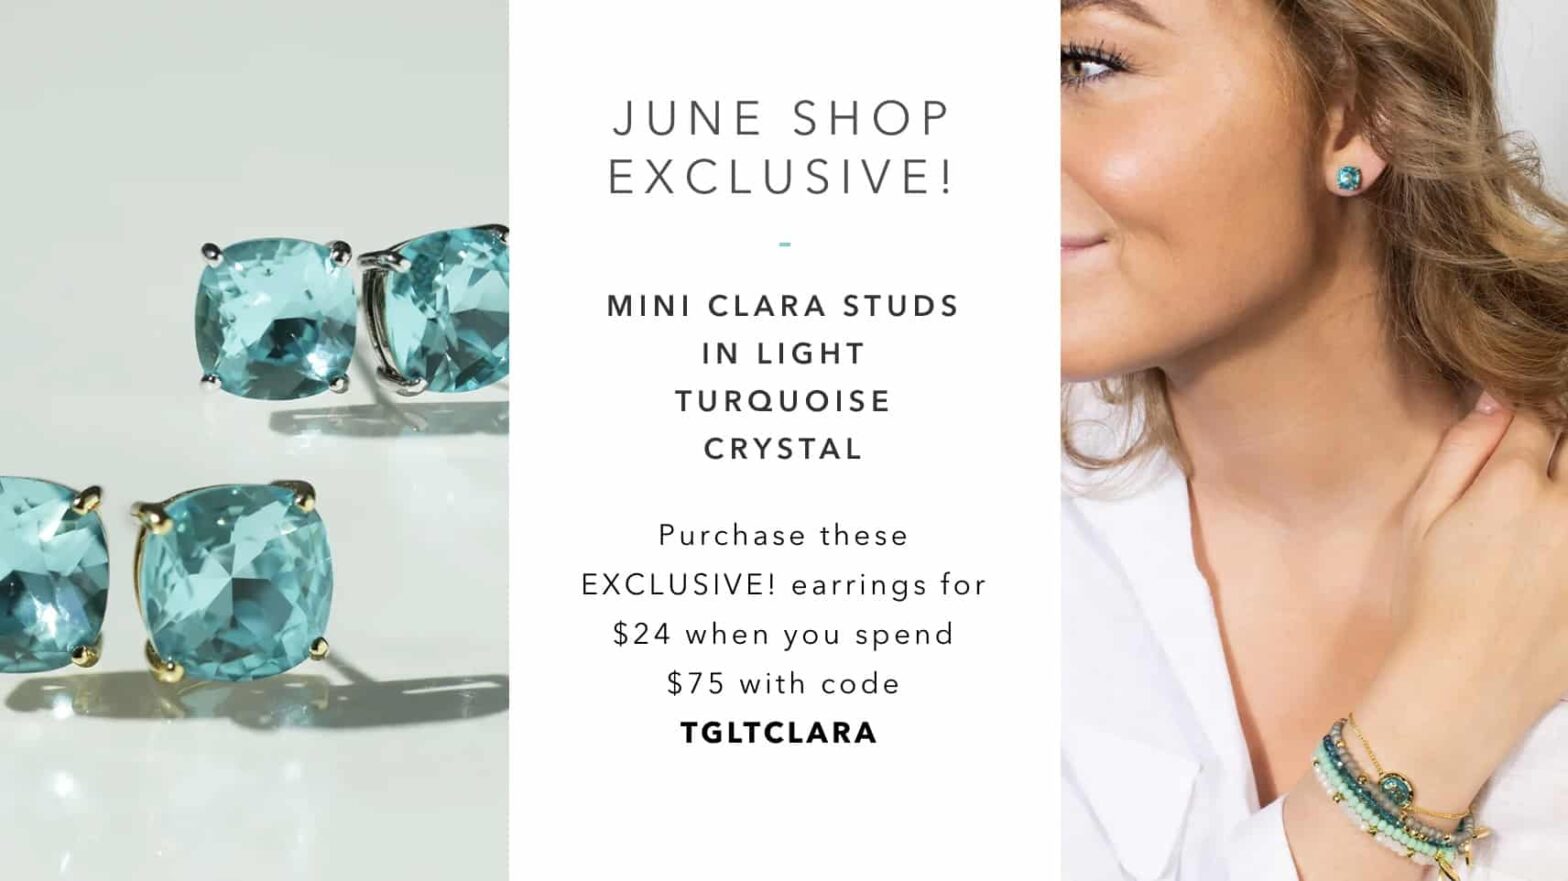 a graphic of June shop exclusive describing the mini clara studs in light turquoise crystals. purchase these exlusive earrings for $24USD/$34CAD when you spend $75USD/$105CAD with code TGLTCLARA. On the left is two pairs of the mini clara studs with a gold and a silver basket. on the right is hallf a womans face showing the min claras and the gold guide me bolo bracelet and 3 spirit stack bracelets